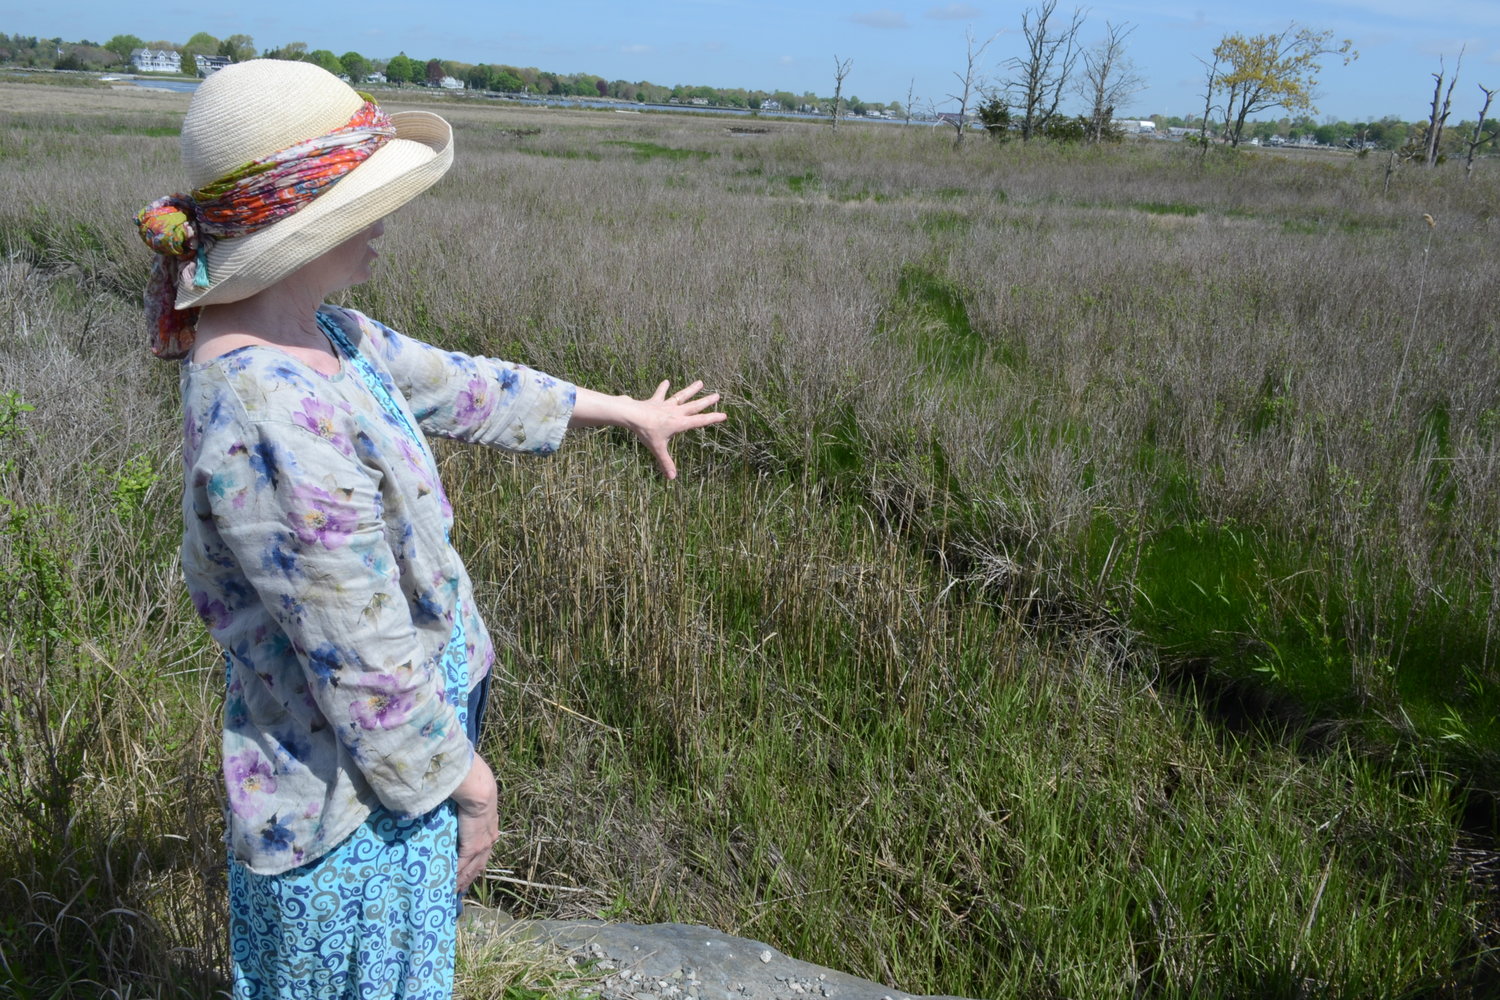 Jenny Flanagan, Treasurer of the Warren Land Conservation Trust Board of Directors, points to a culvert in Jacob’s Point. The group hopes to work with DEM to perform more work to improve tidal flow in the area.